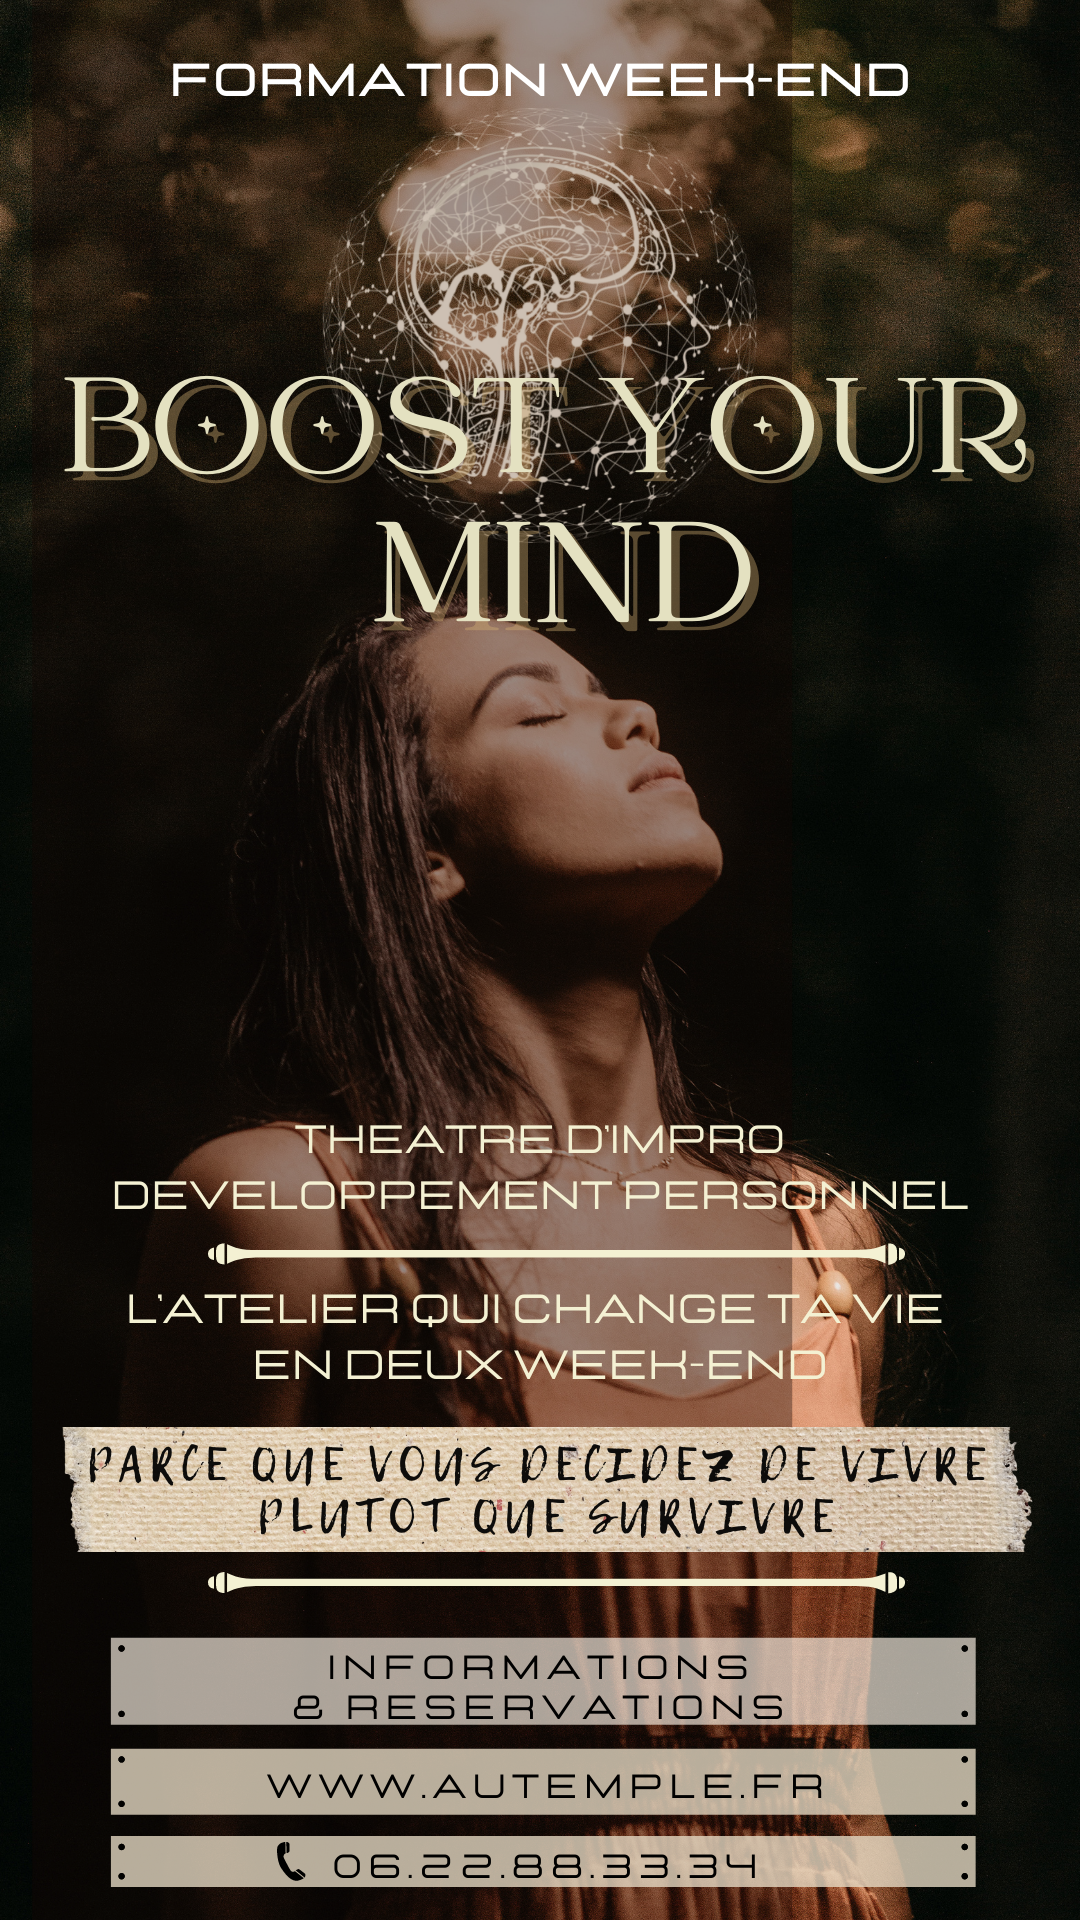 BOOST YOUR MIND